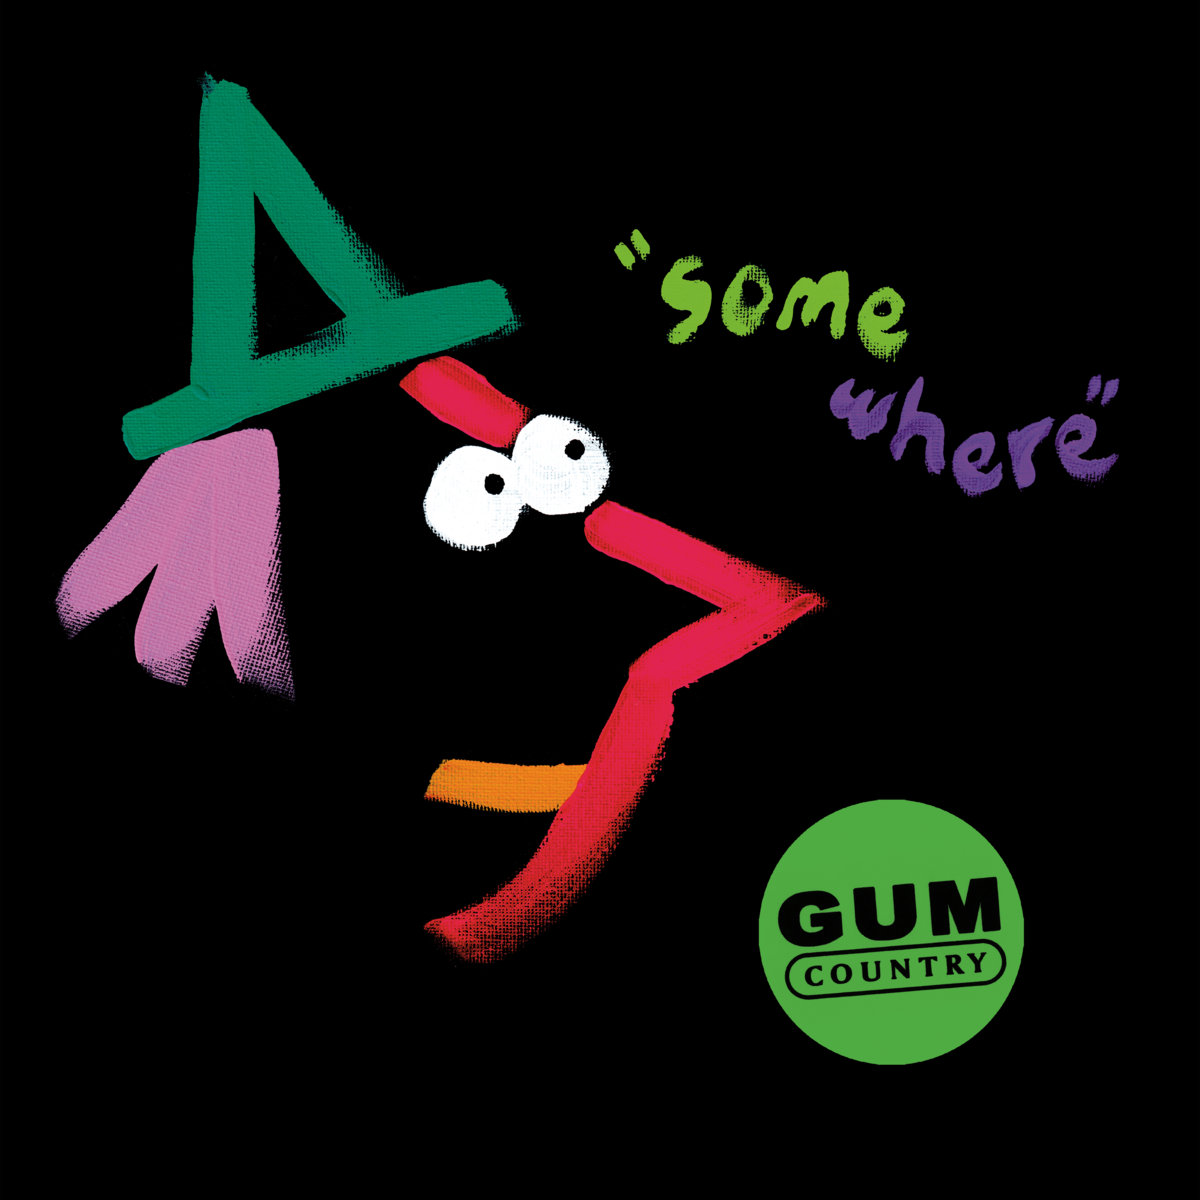 gum country somewhere album art illustration of witch on black background